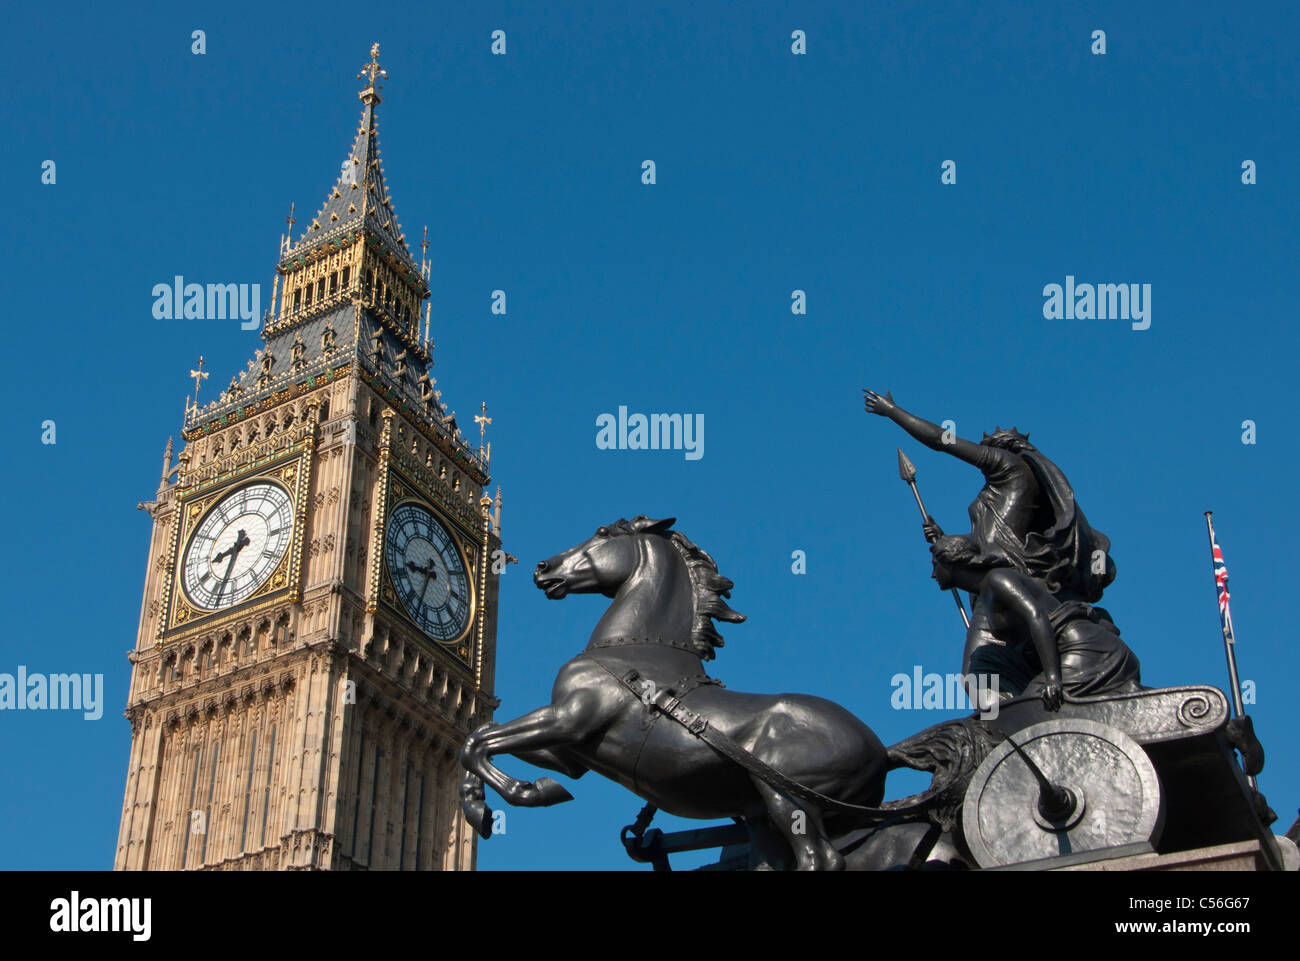 The Clock Tower Big Ben with statue of Queen Boadicea on horse drawn chariot at Westminster Pier London UK Stock Photo